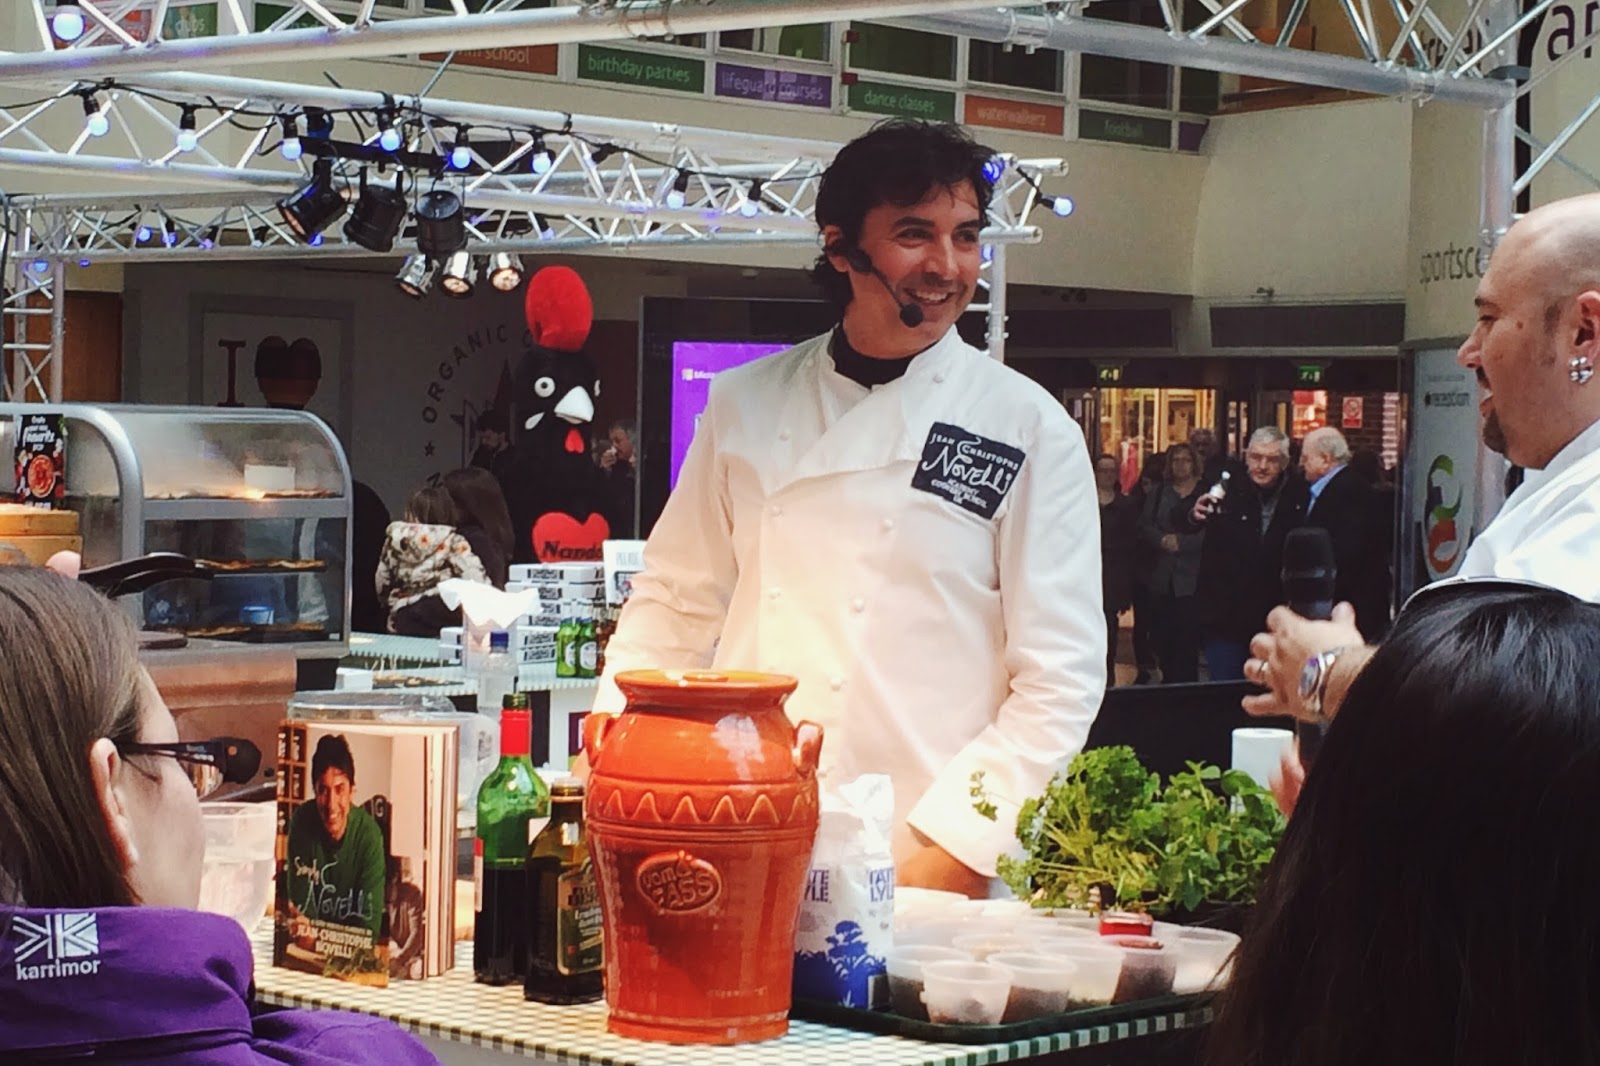 FashionFake, a UK fashion and lifestyle blog. Read my review of Eat Street, an event which celebrates the best of Basingstoke Festival Places' restaurants and eateries, with celebrity chef appearance by Jean-Christophe Novelli.